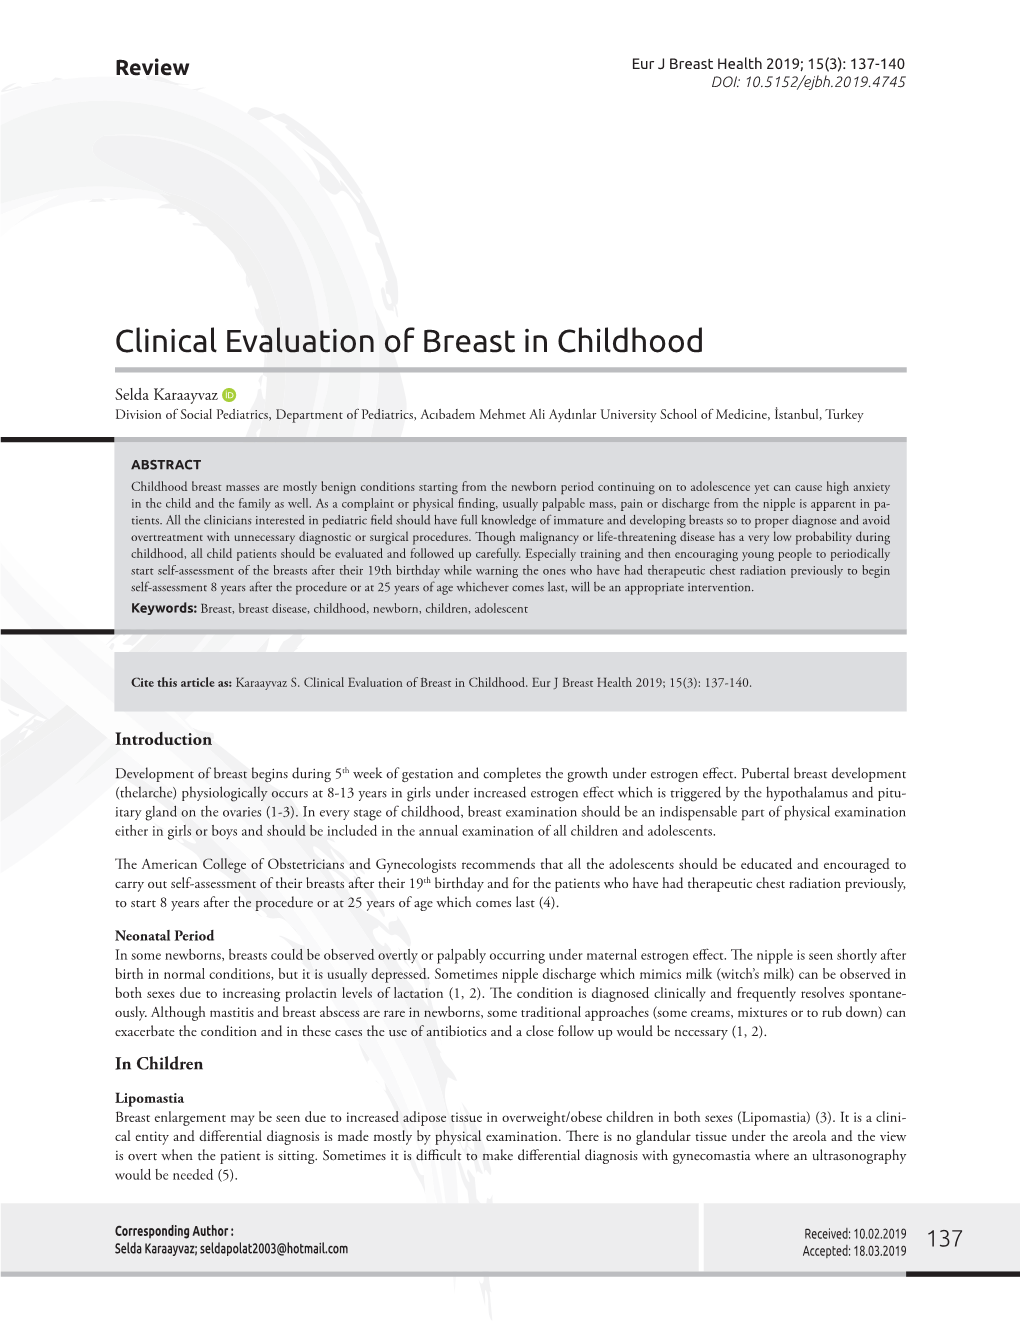 Clinical Evaluation of Breast in Childhood